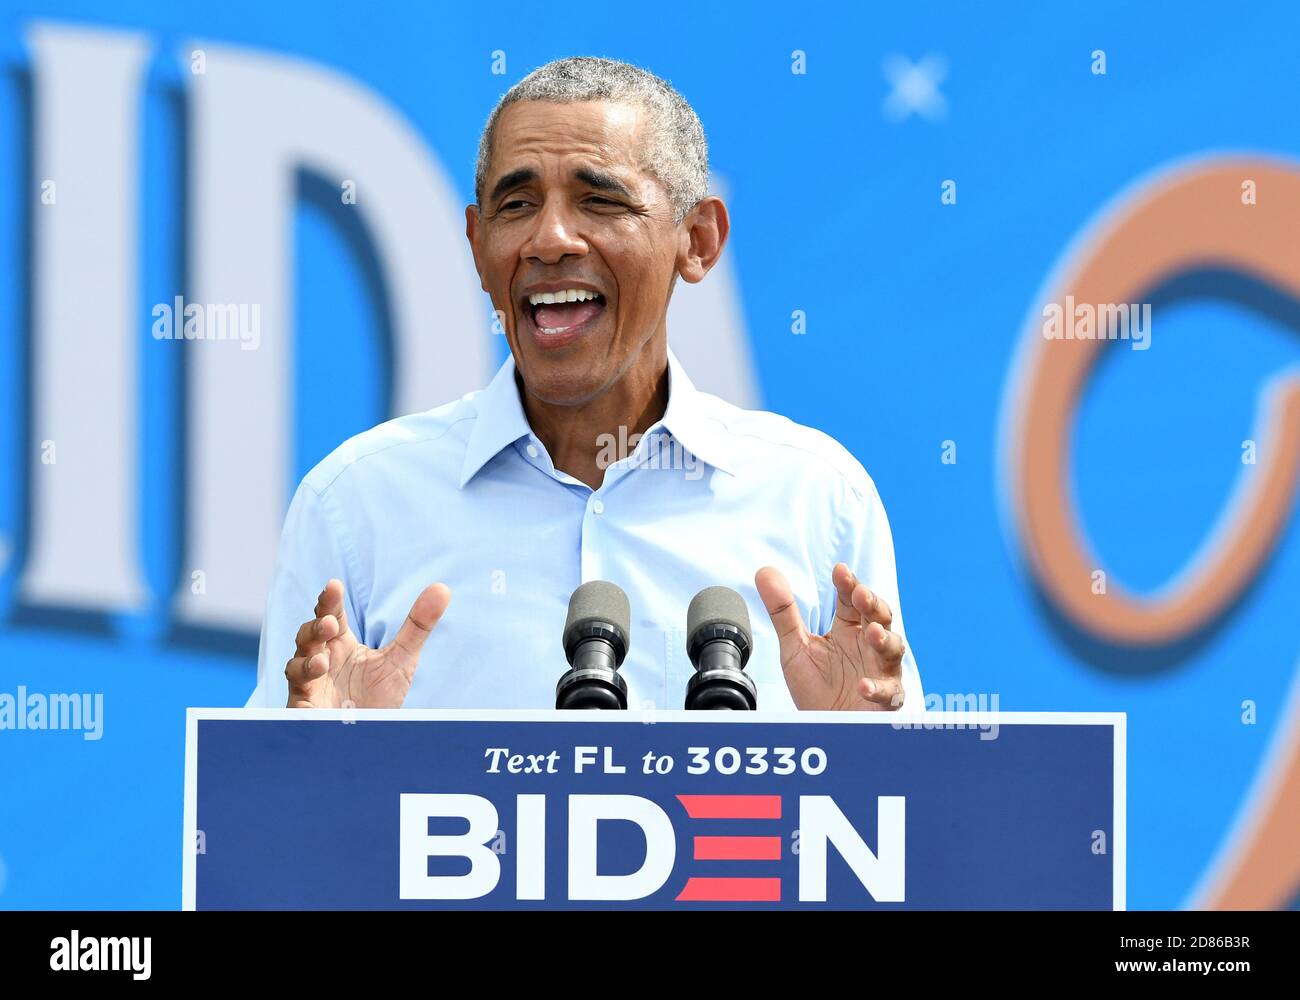 October 27, 2020 - Orlando, Florida, United States - Former U.S. President Barack Obama speaks in support of Democratic presidential nominee Joe Biden during a drive-in rally on October 27, 2020 in Orlando, Florida. Mr. Obama is campaigning for his former Vice President before the Nov. 3rd election. (Paul Hennessy/Alamy) Credit: Paul Hennessy/Alamy Live News Stock Photo